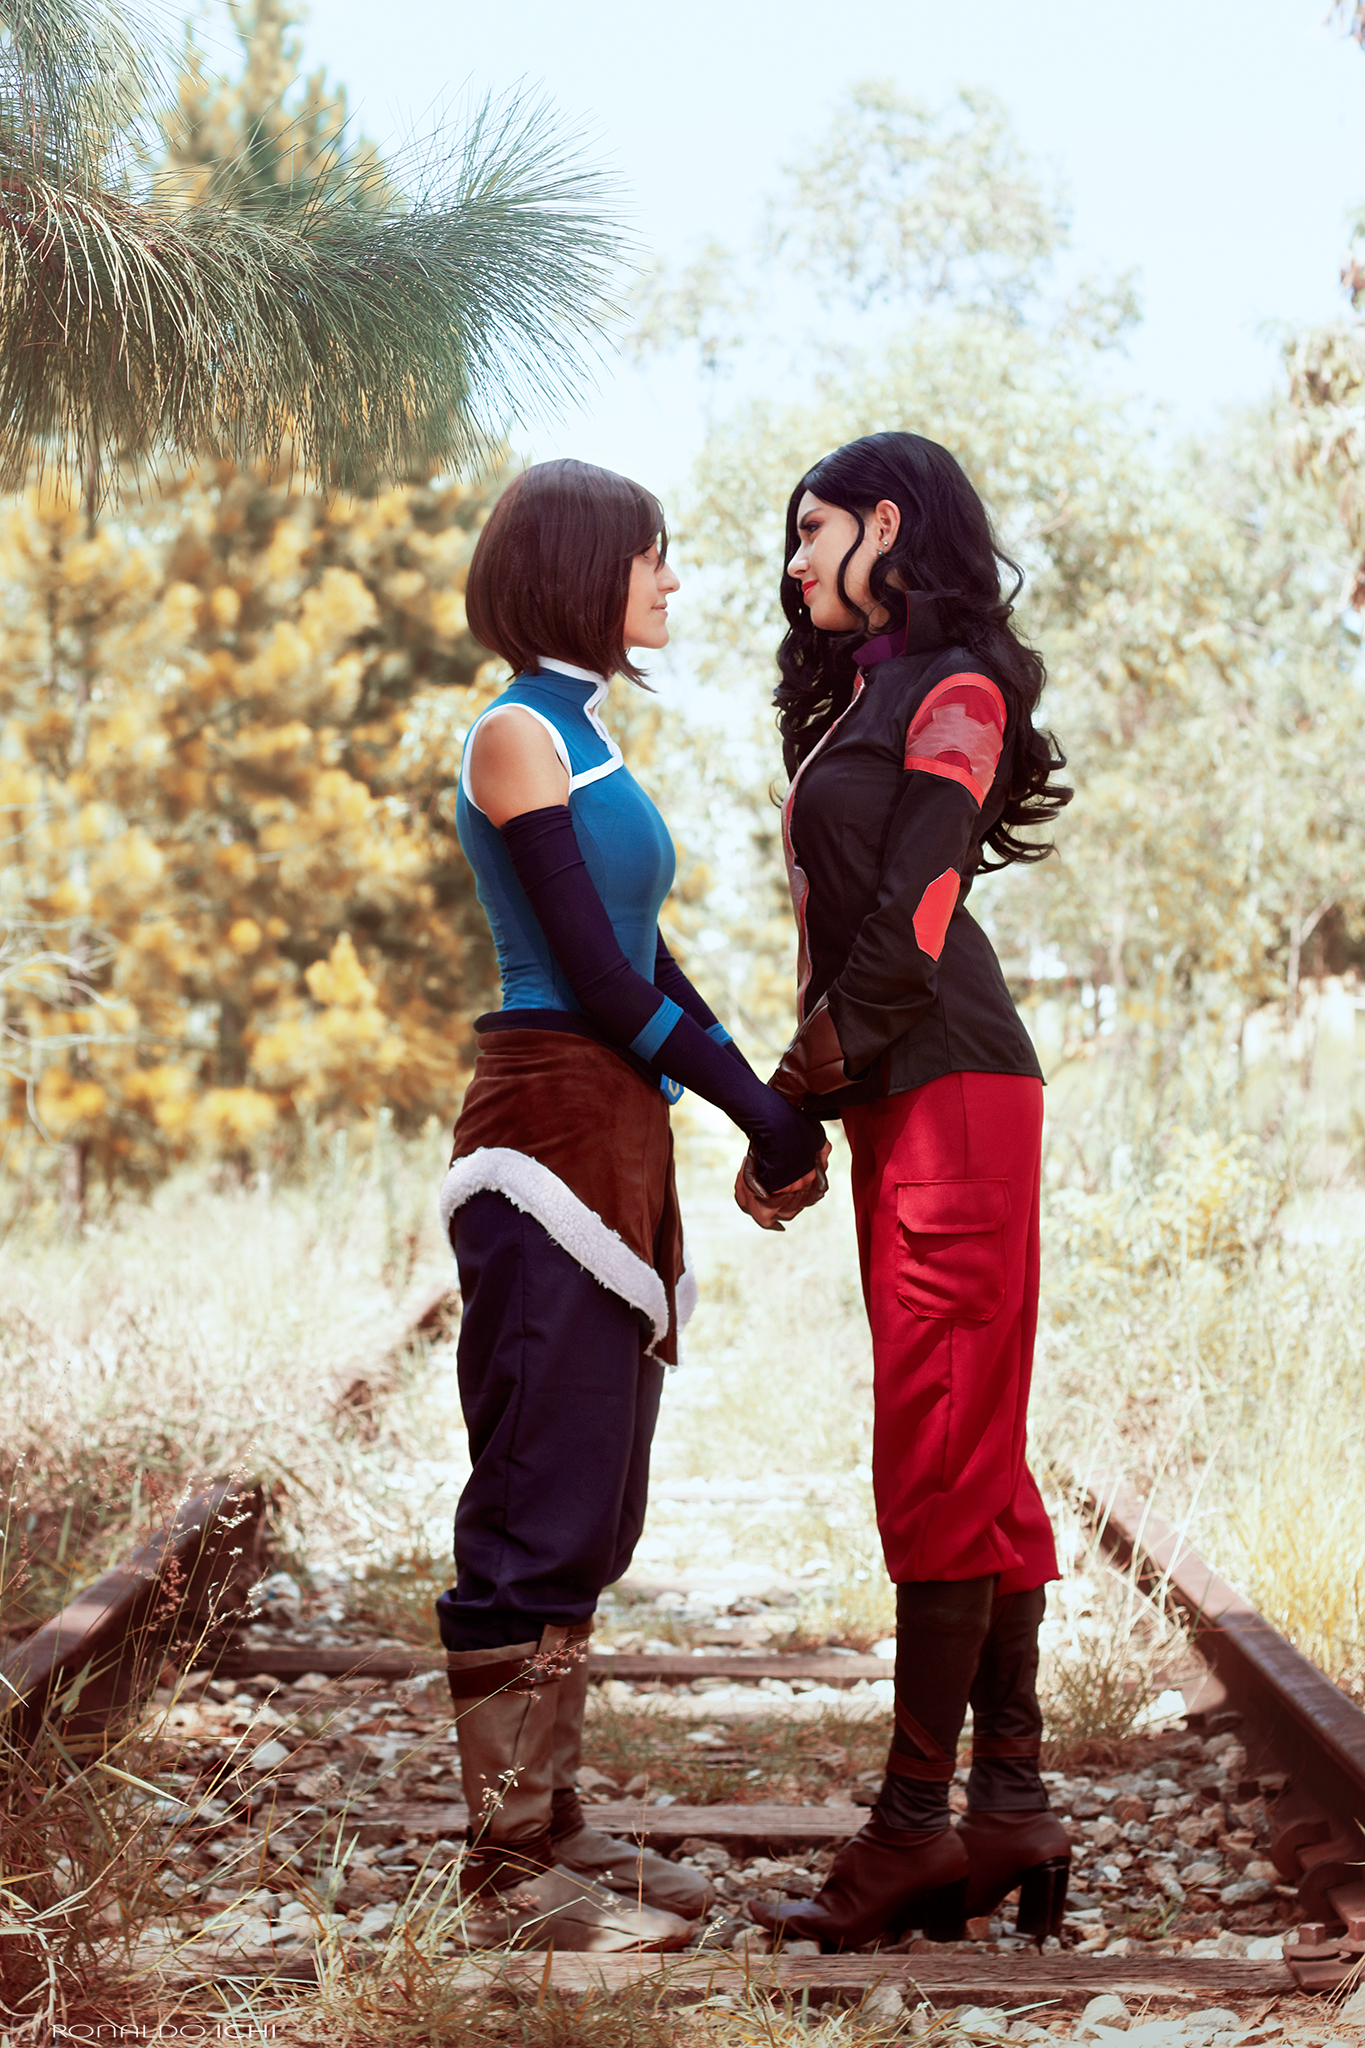 cosplay - Korra and Asami Sato from The Legend of Korra - cosplayers Rizzy and Rach - photography by Ronaldo Ichi